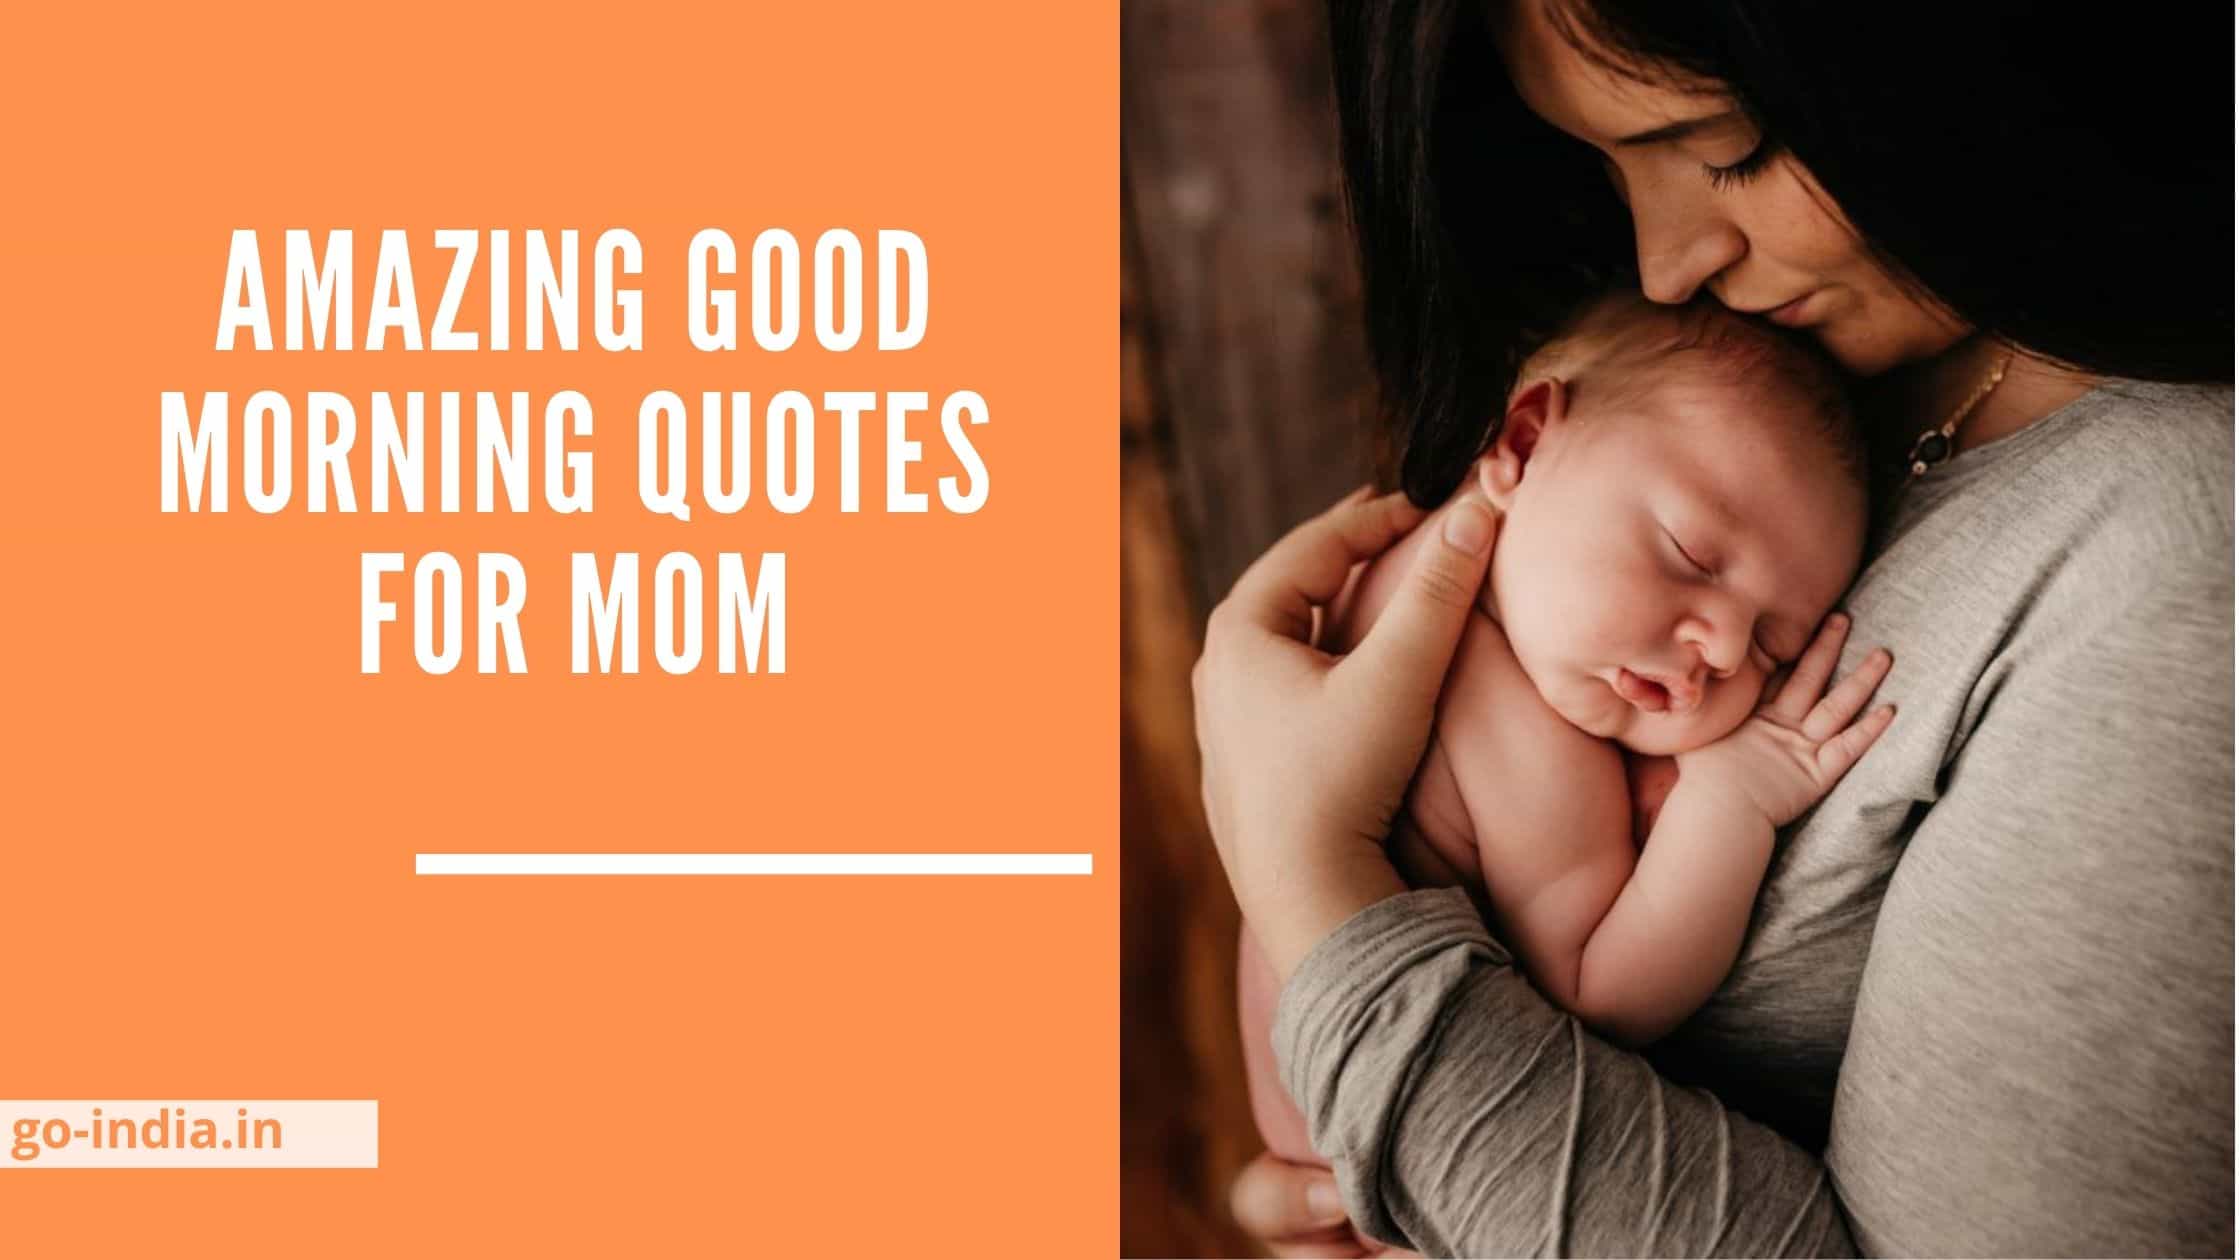 Amazing Good Morning Quotes for Mom